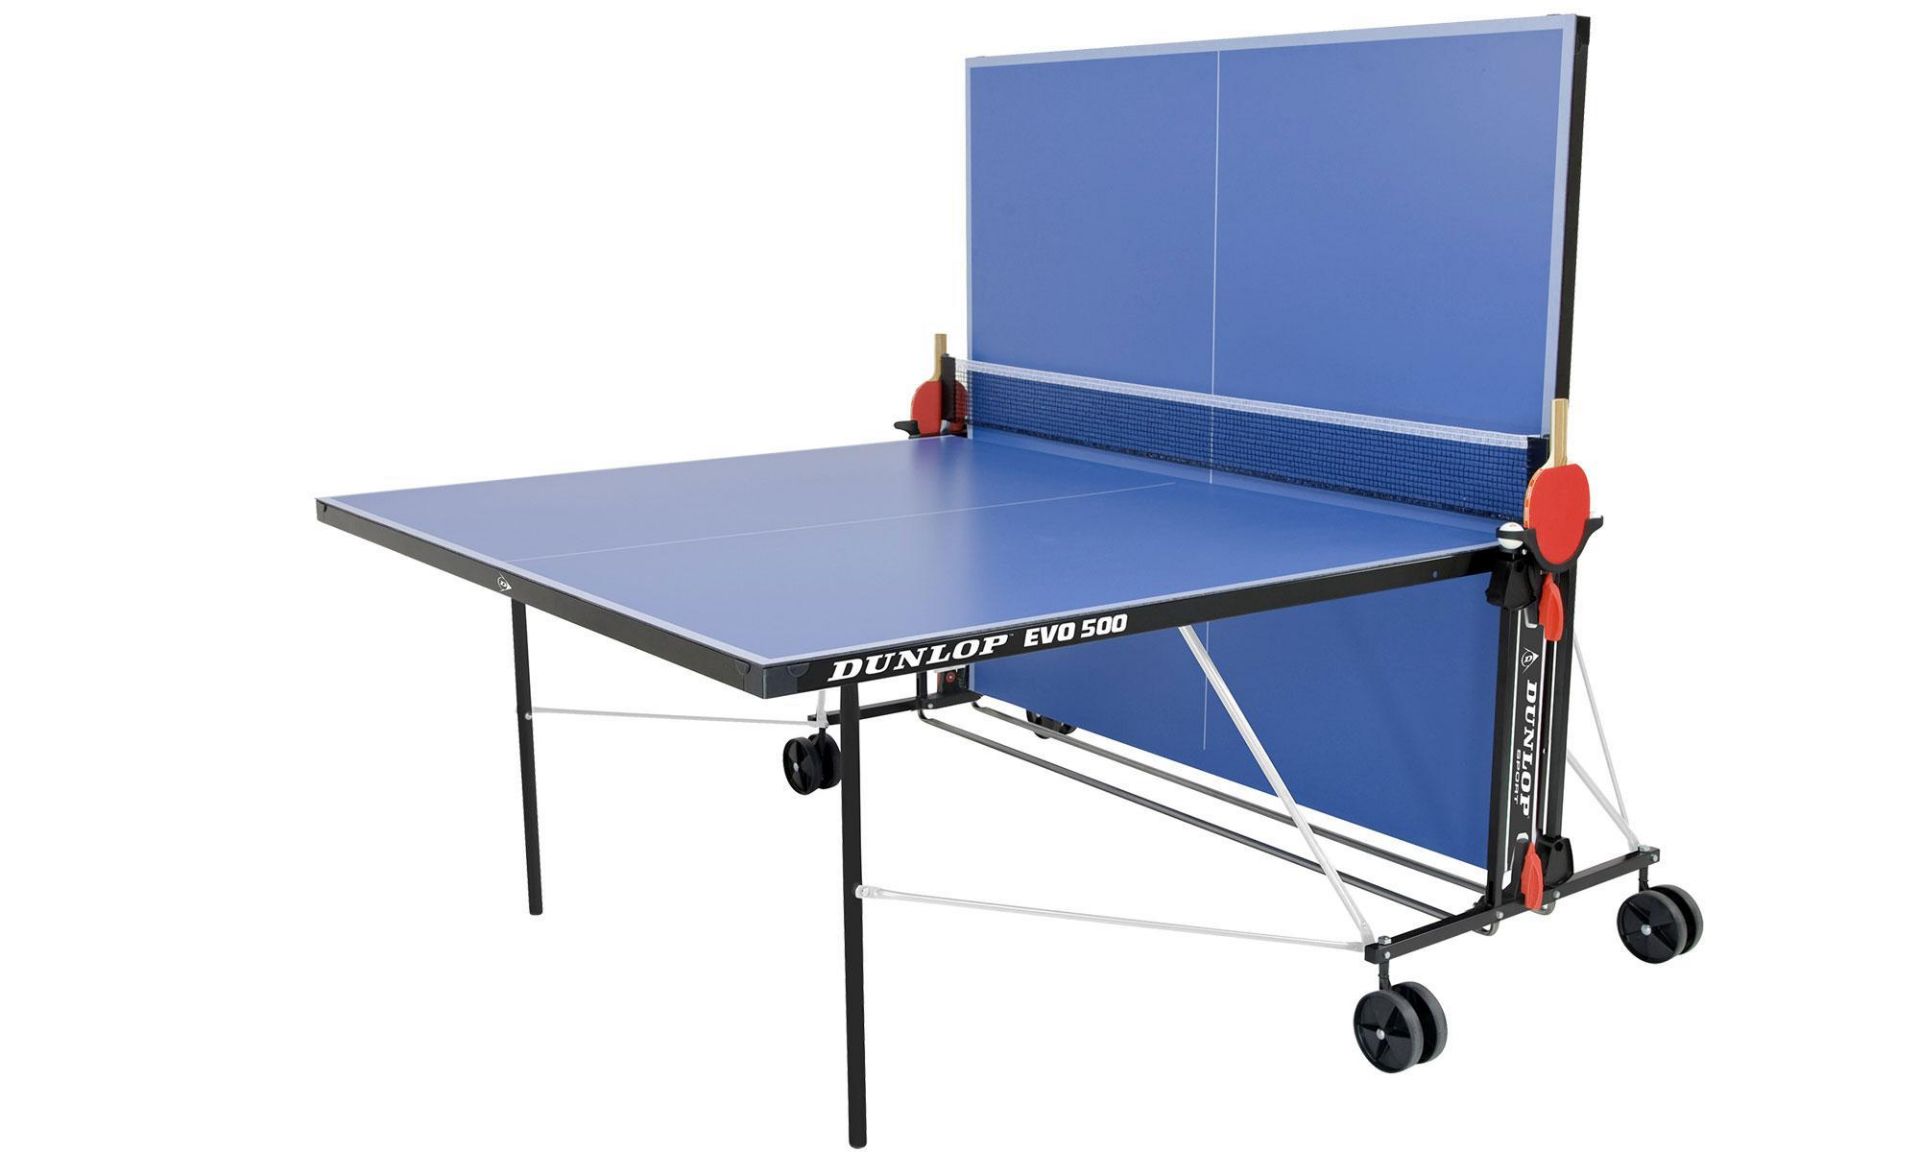 1 x Sweatband Dunlop Evo 500 Outdoor TT Table Blue RRP œ399.00 This lot is a completely UNCHECKED.